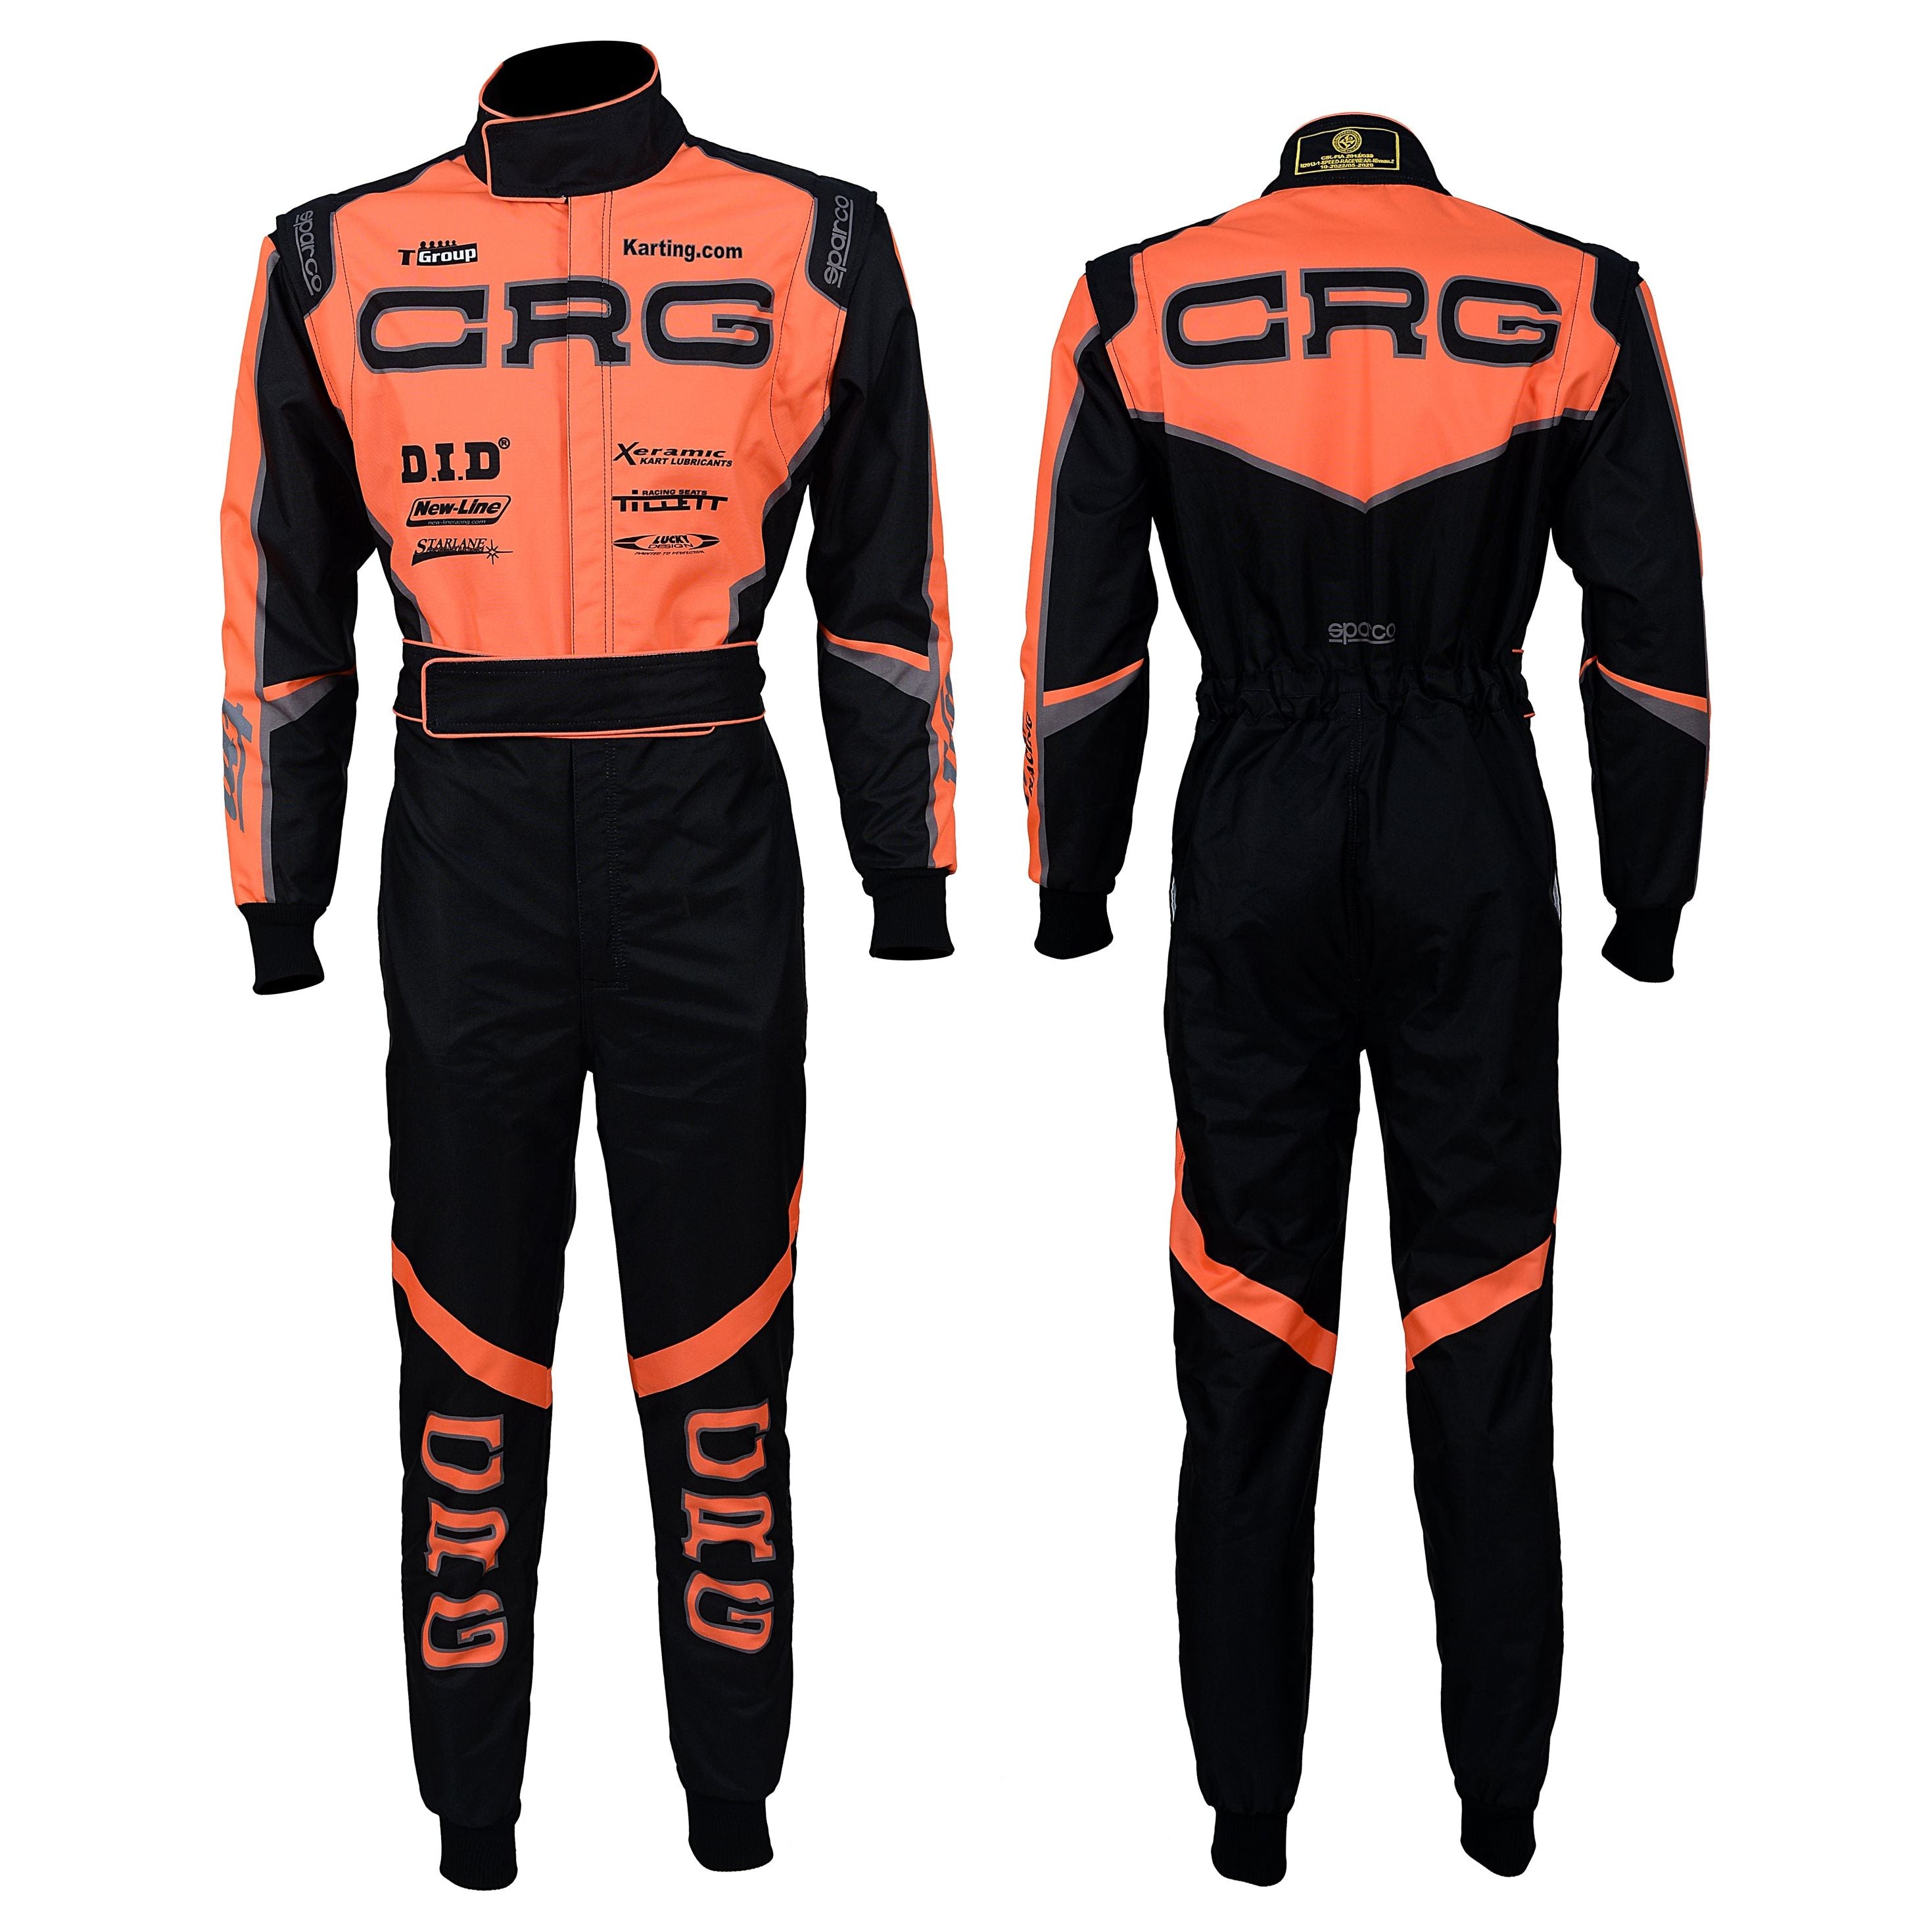 Go kart racing Sublimation Protective clothing Racing gear Suit N-013